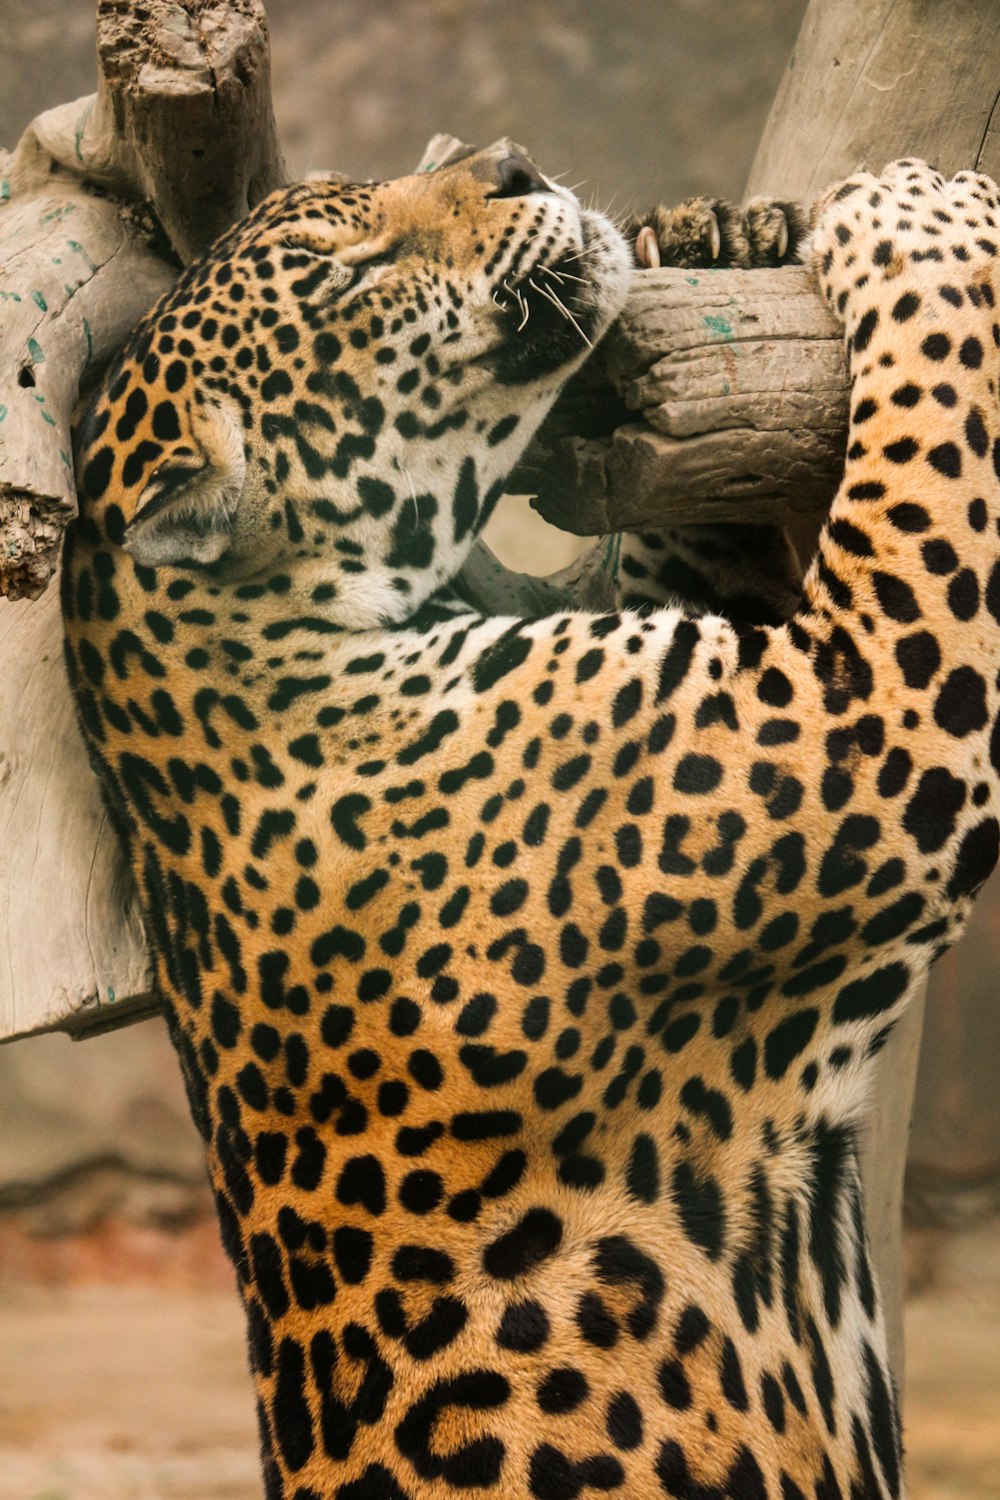 brown and black leopard lying on brown wooden surface